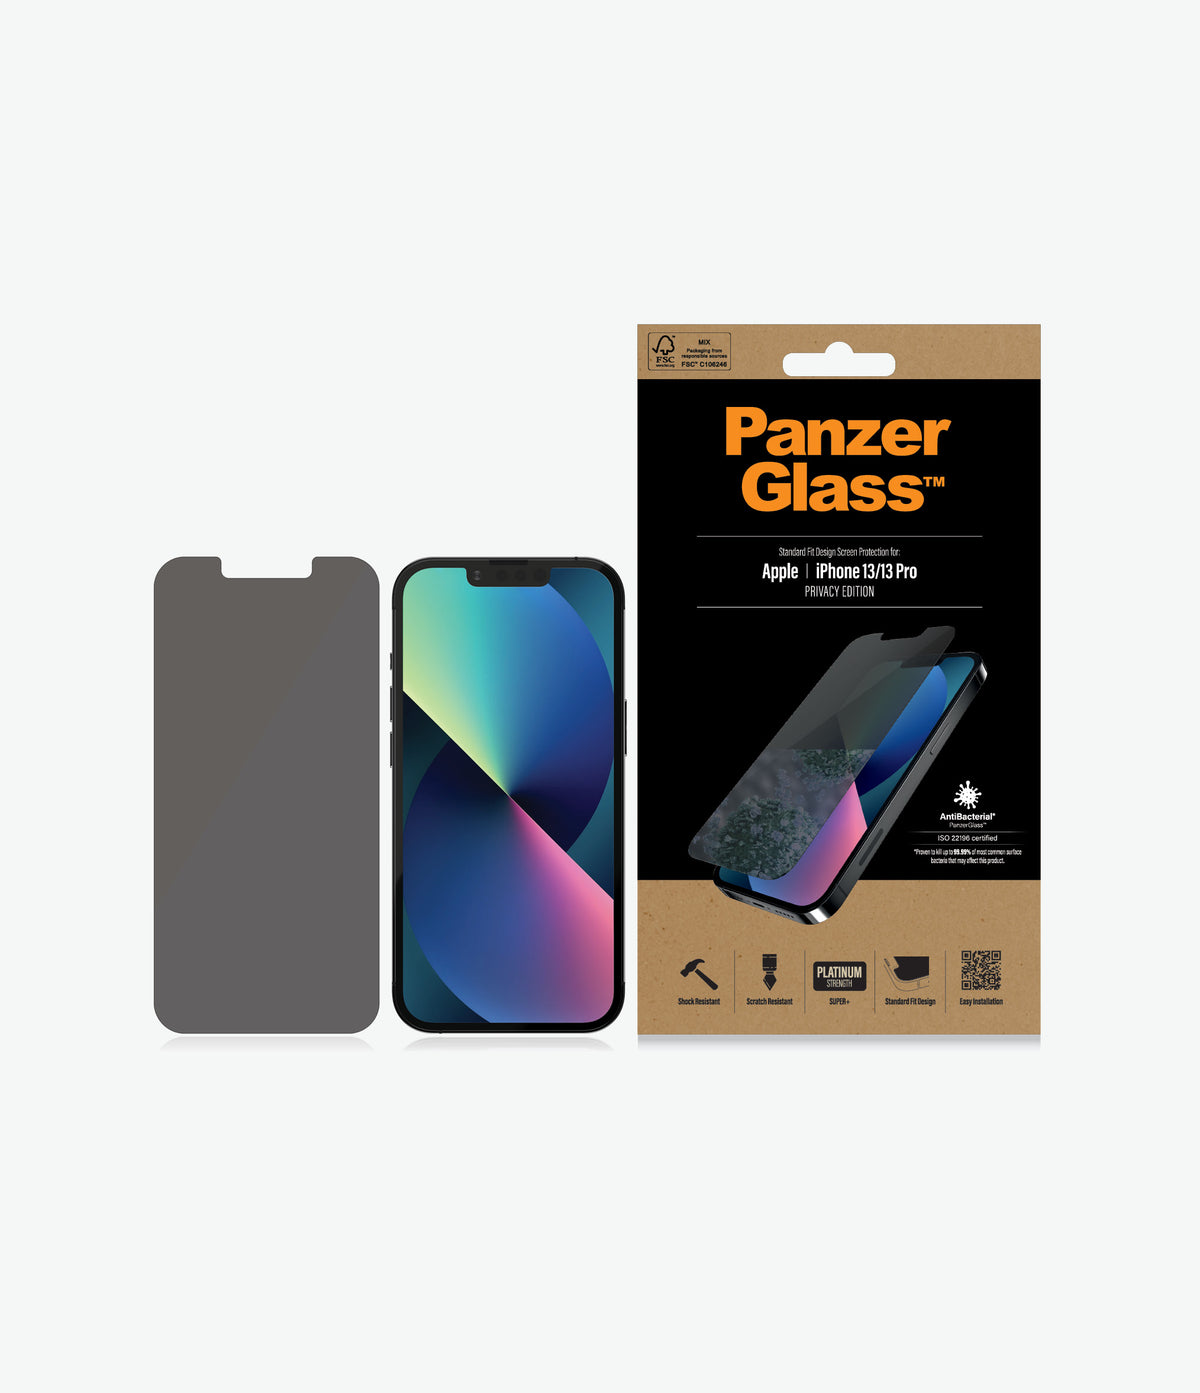 PANZERGLASS iPhone 13/13 Pro - Standard Fit Tempered Glass Screen Protector w/ Anti-Microbial - Privacy